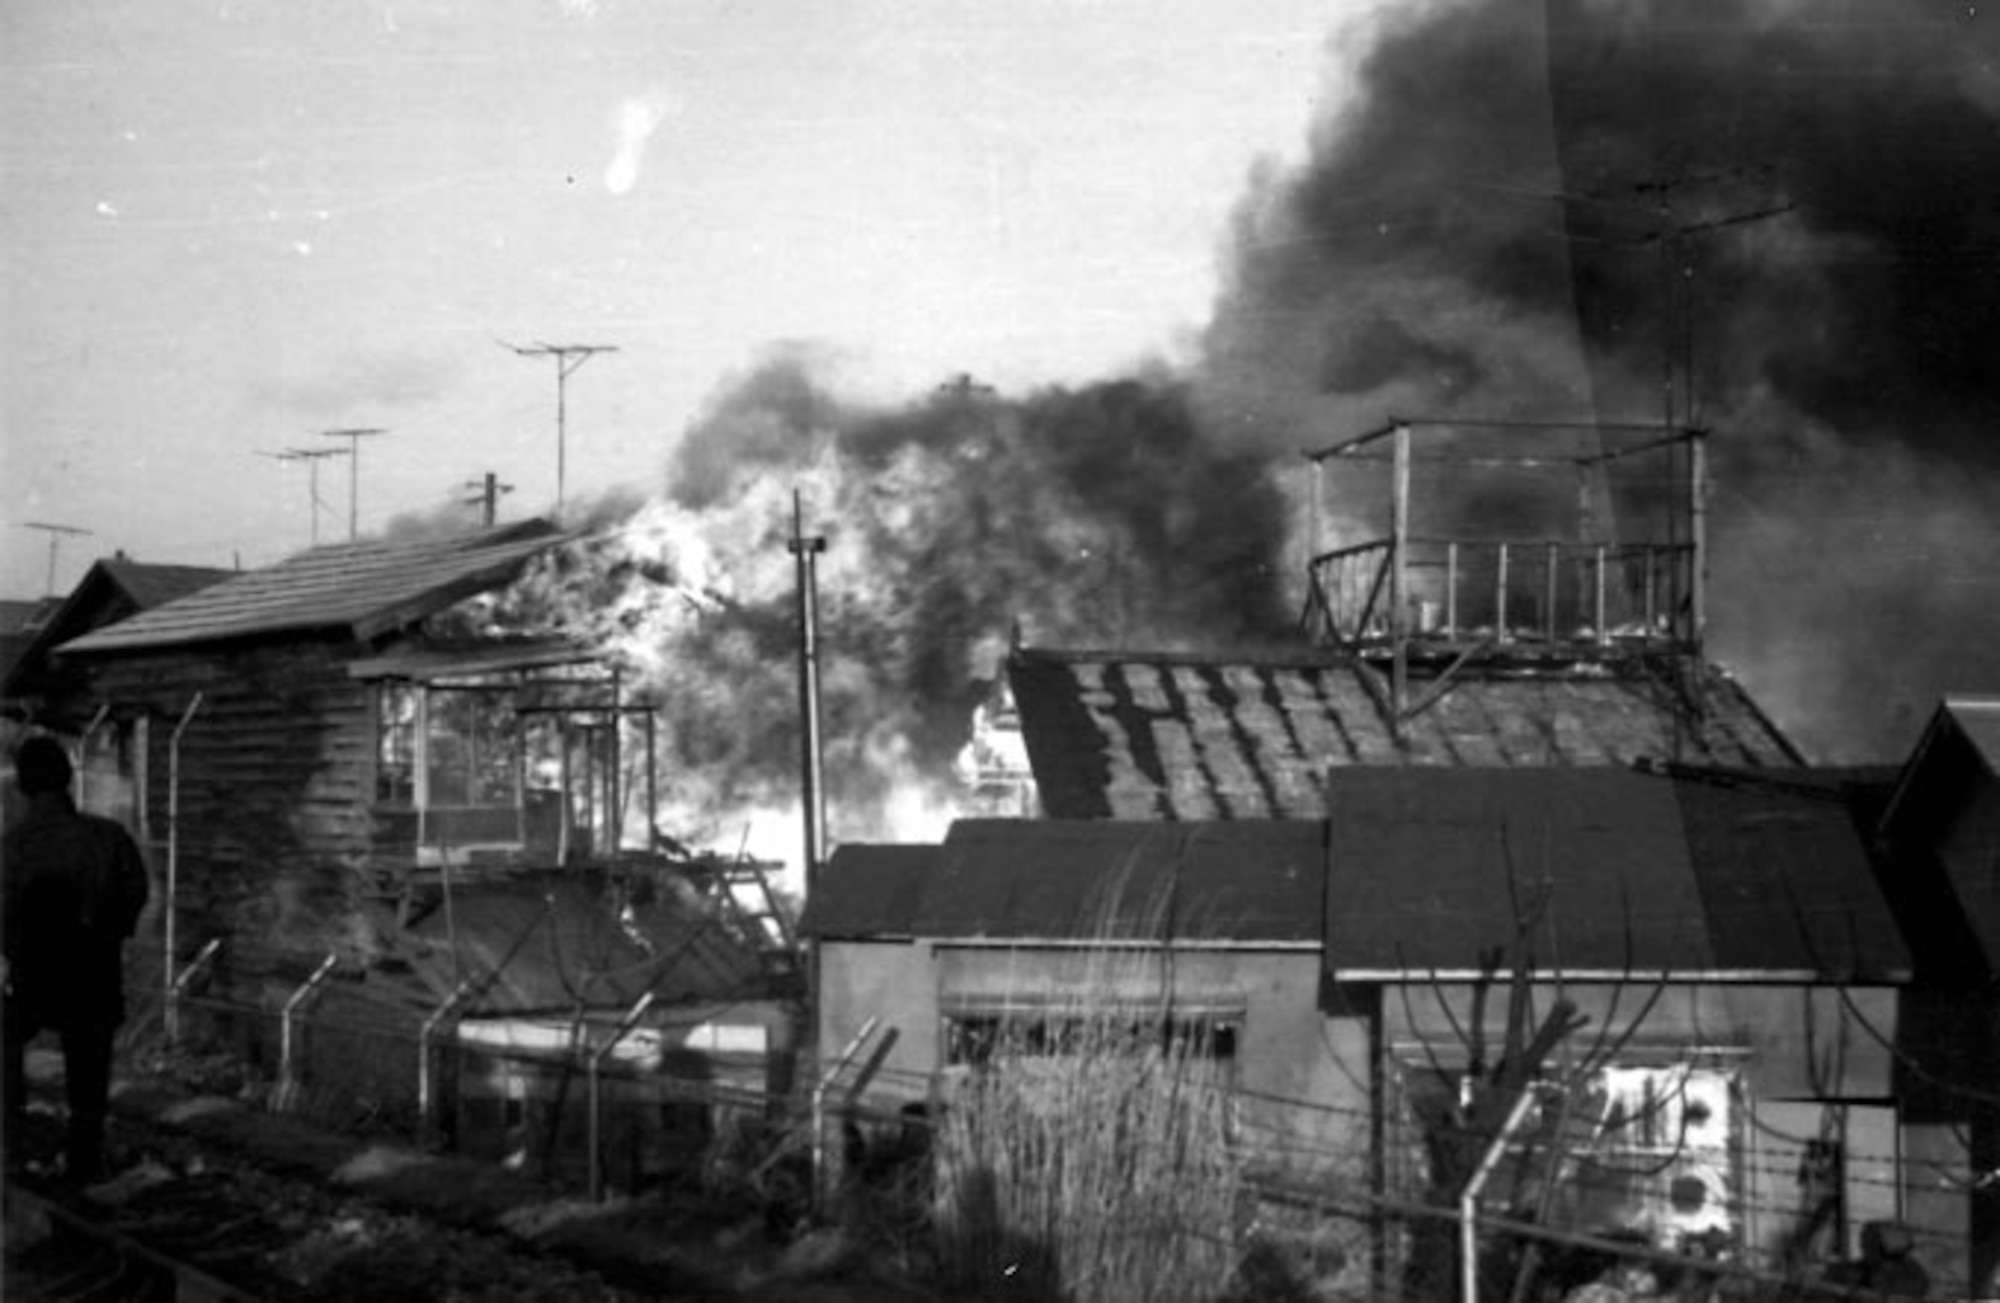 Fire destroys a Japanese bar just outside of the Misawa Air Base perimeter on January 11, 1966.